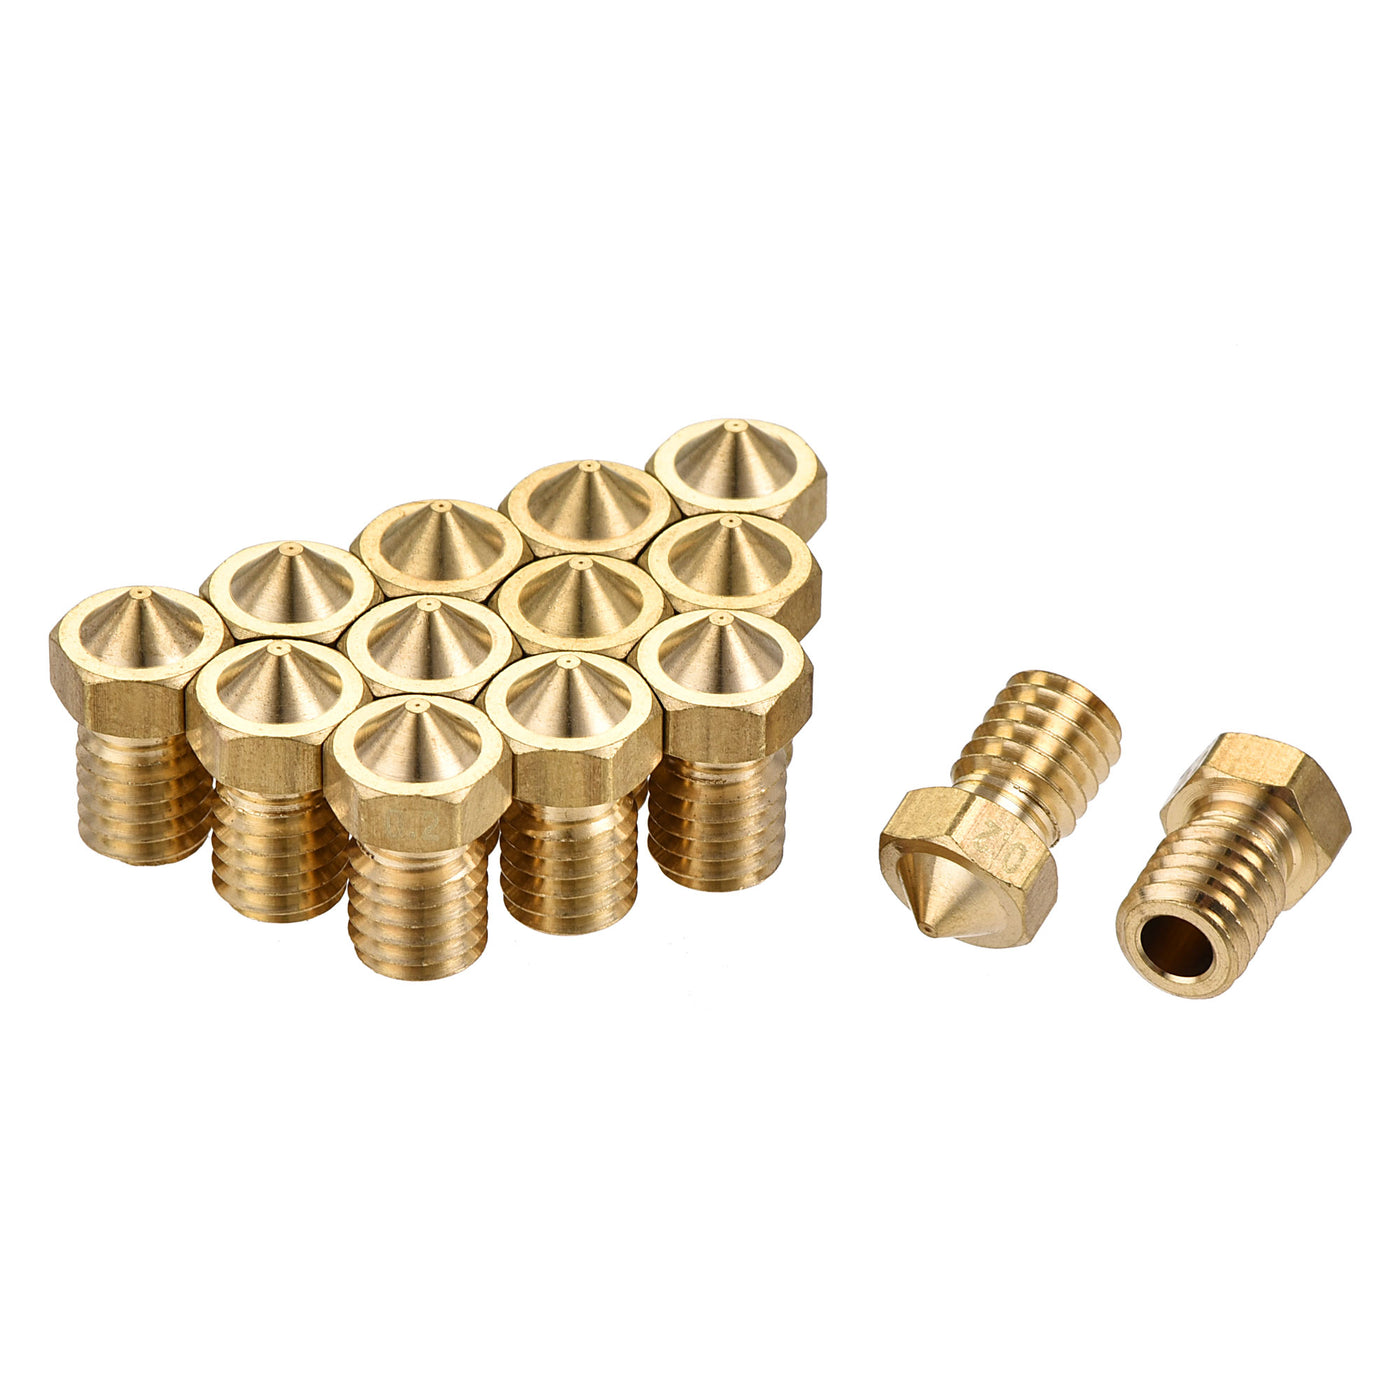 uxcell Uxcell 0.2mm 3D Printer Nozzle, 14pcs M6 Thread for V5 V6 3mm Extruder Print, Brass